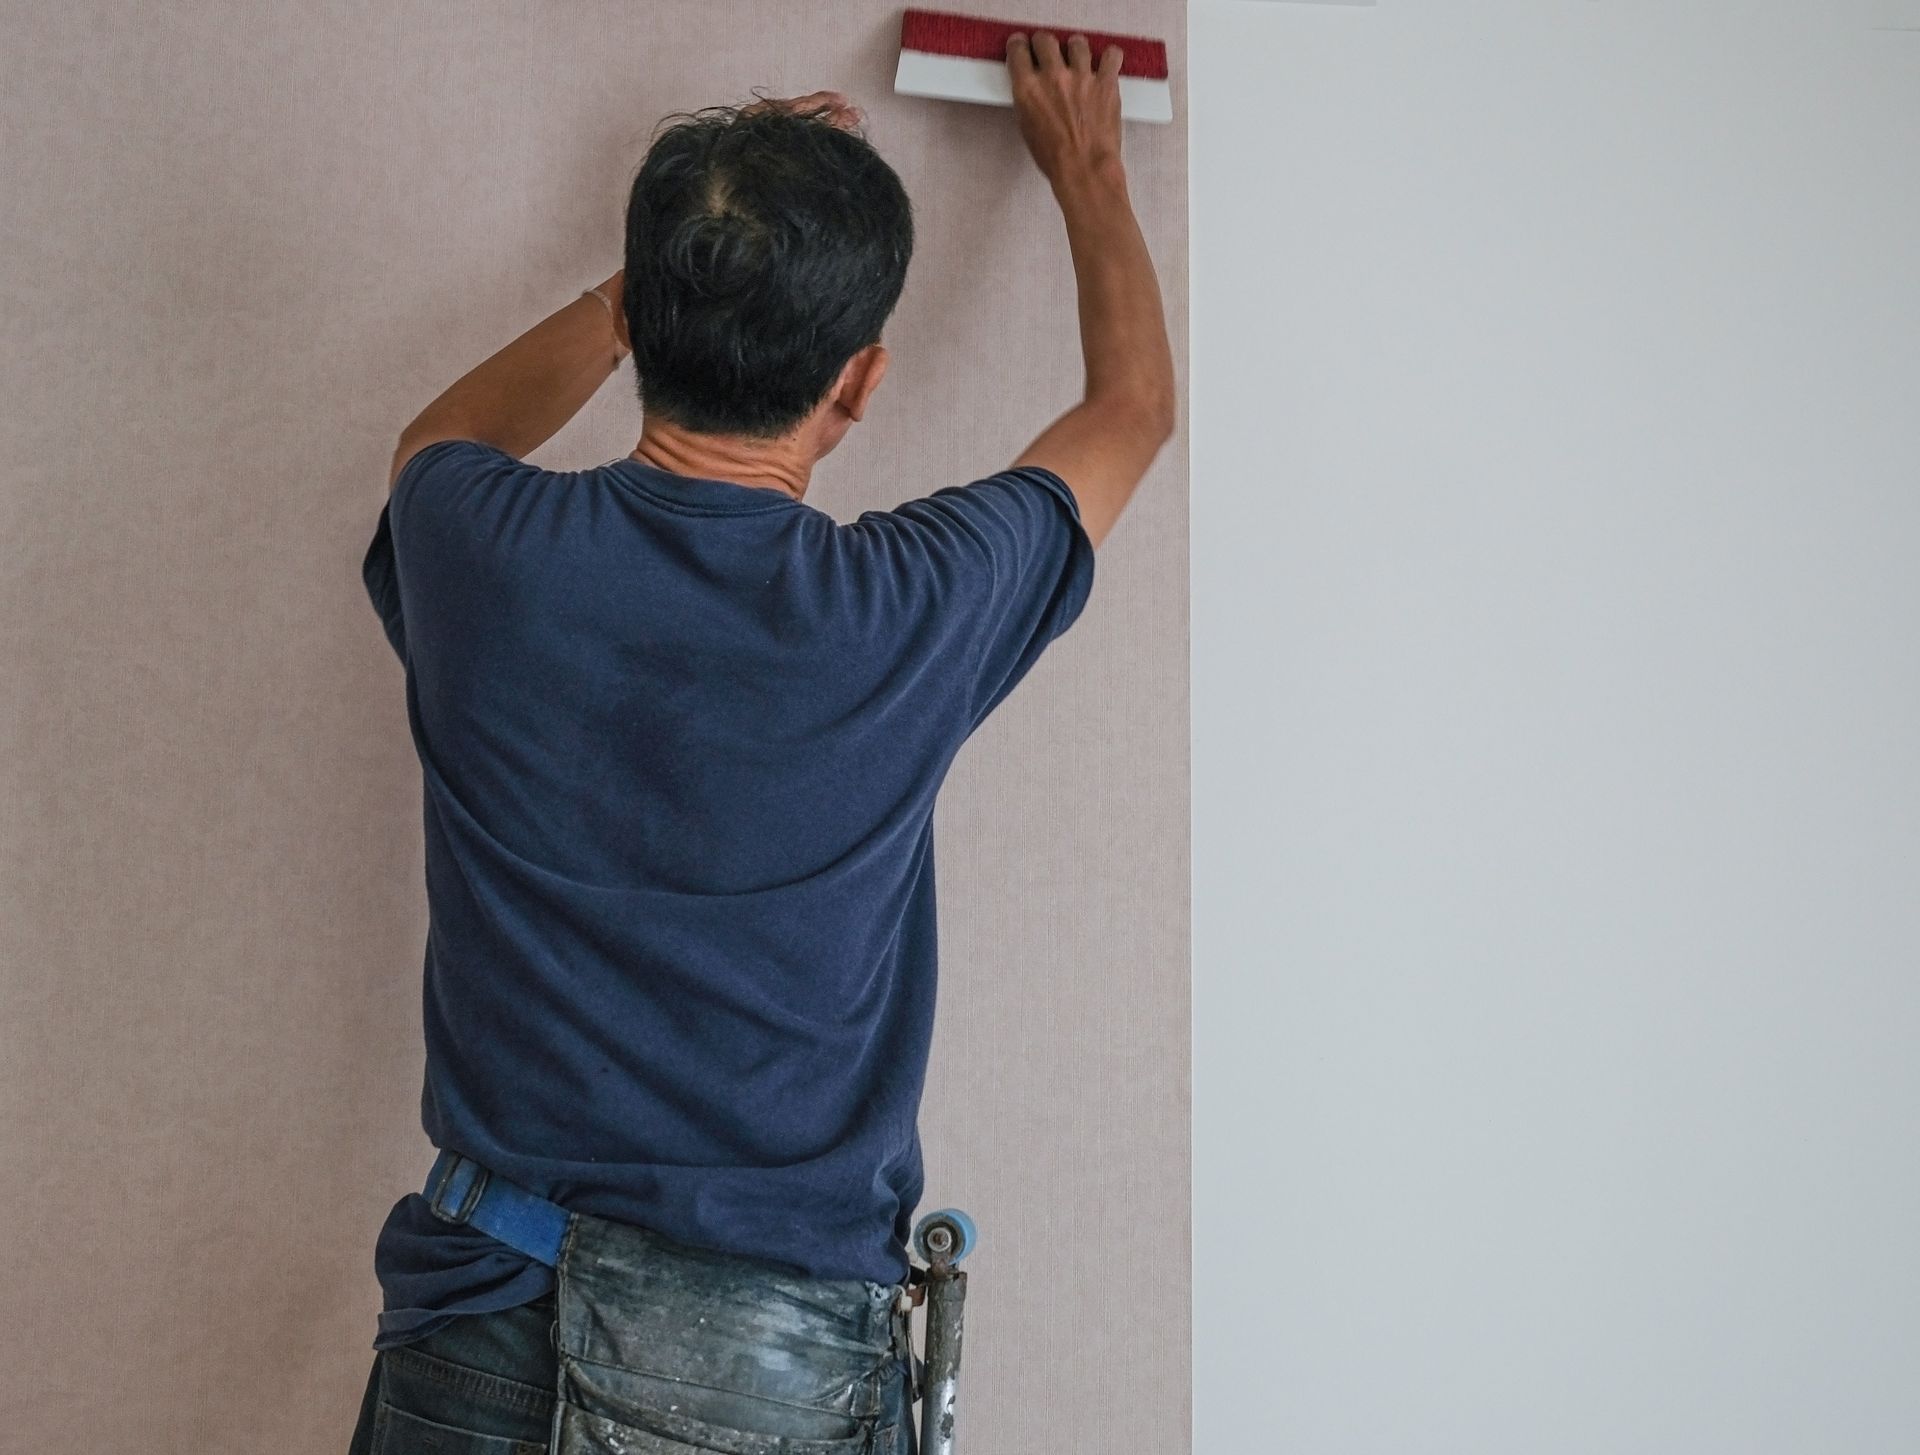 A worker is installing wallpaper on a white wall.